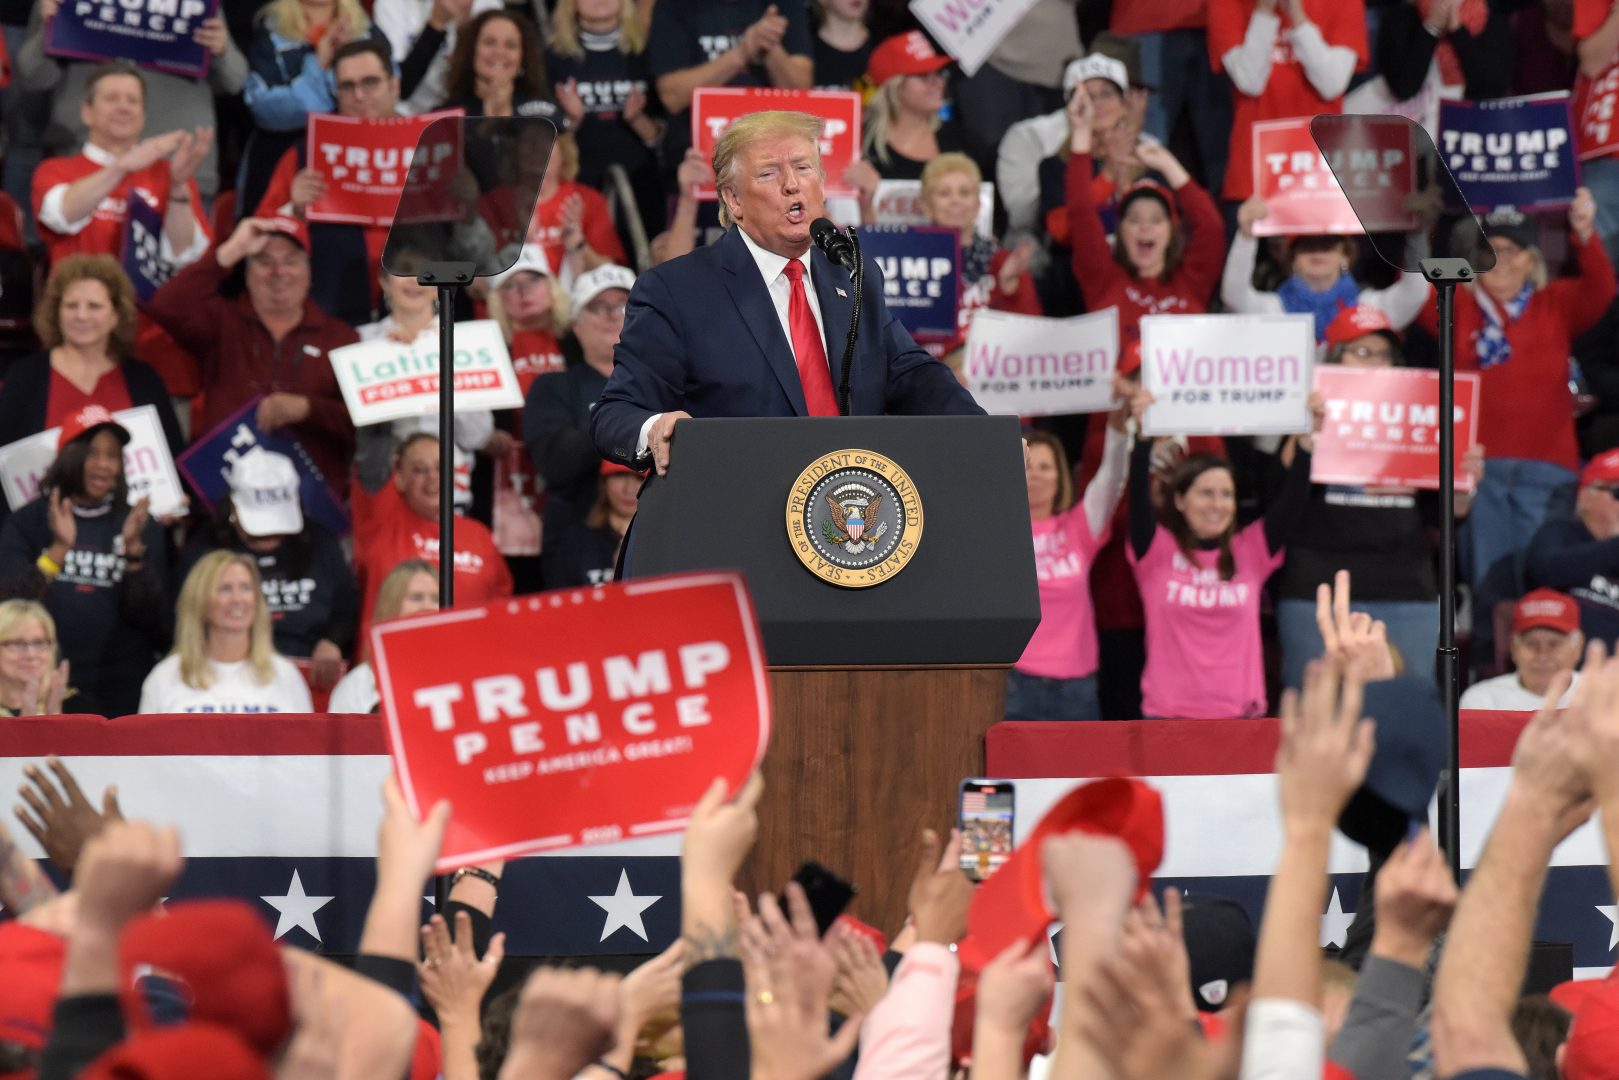 President Donald Trump speaks during a 2020 campaign rally Dec. 10, 2019, at the Giant Center in Hershey, Pennsylvania. (Matt Smith for WITF/PA Post)